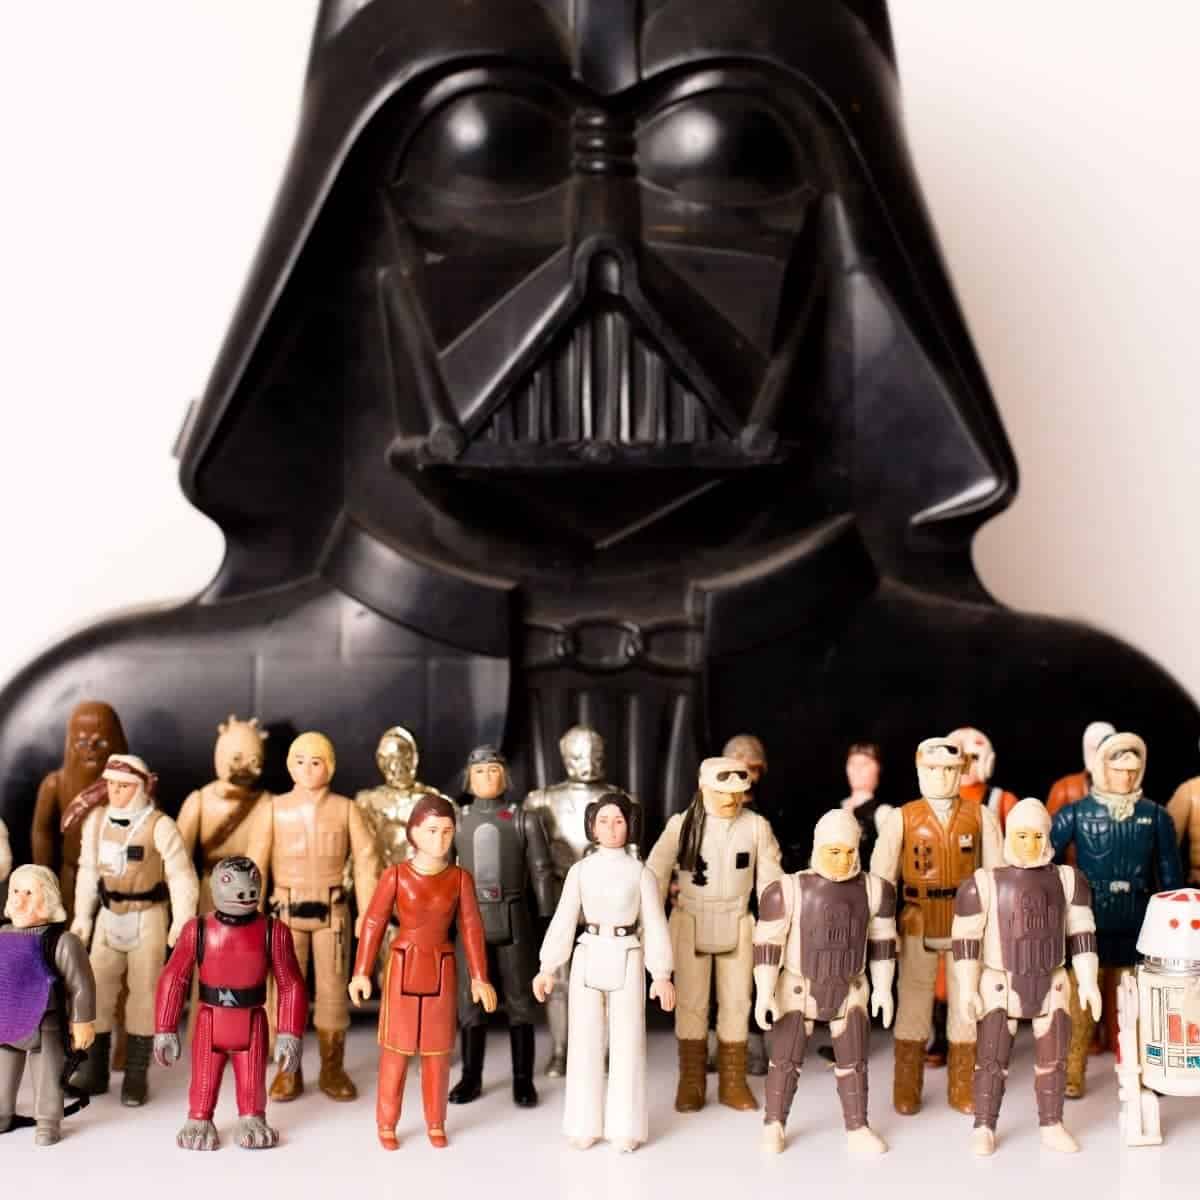 Star wars character toys.